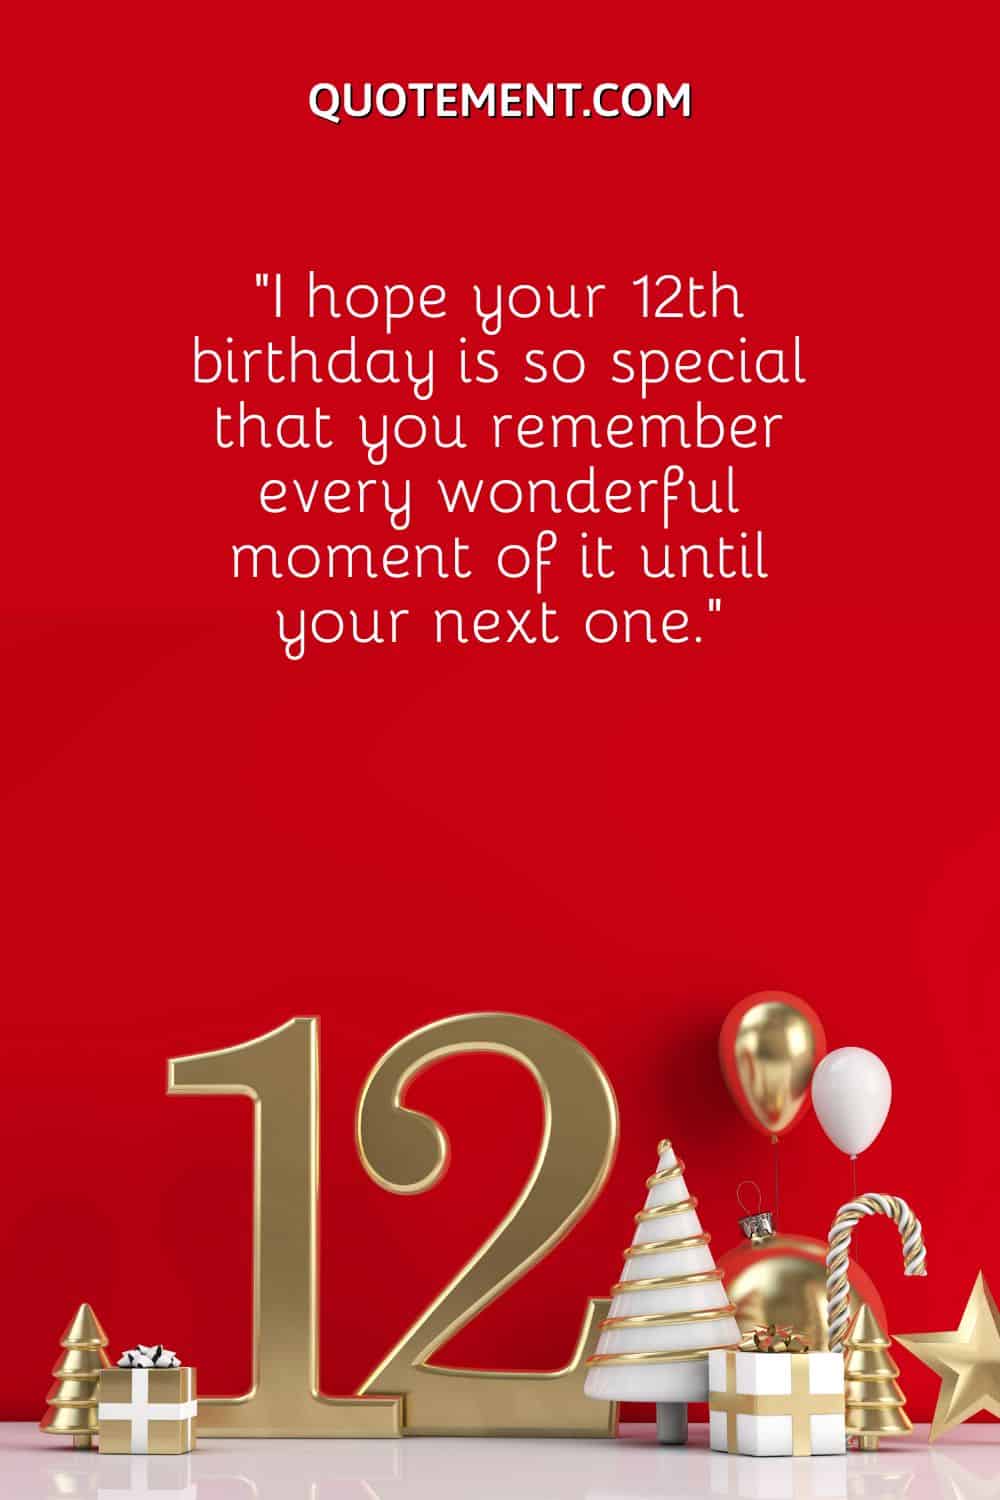 “I hope your 12th birthday is so special that you remember every wonderful moment of it until your next one.”.